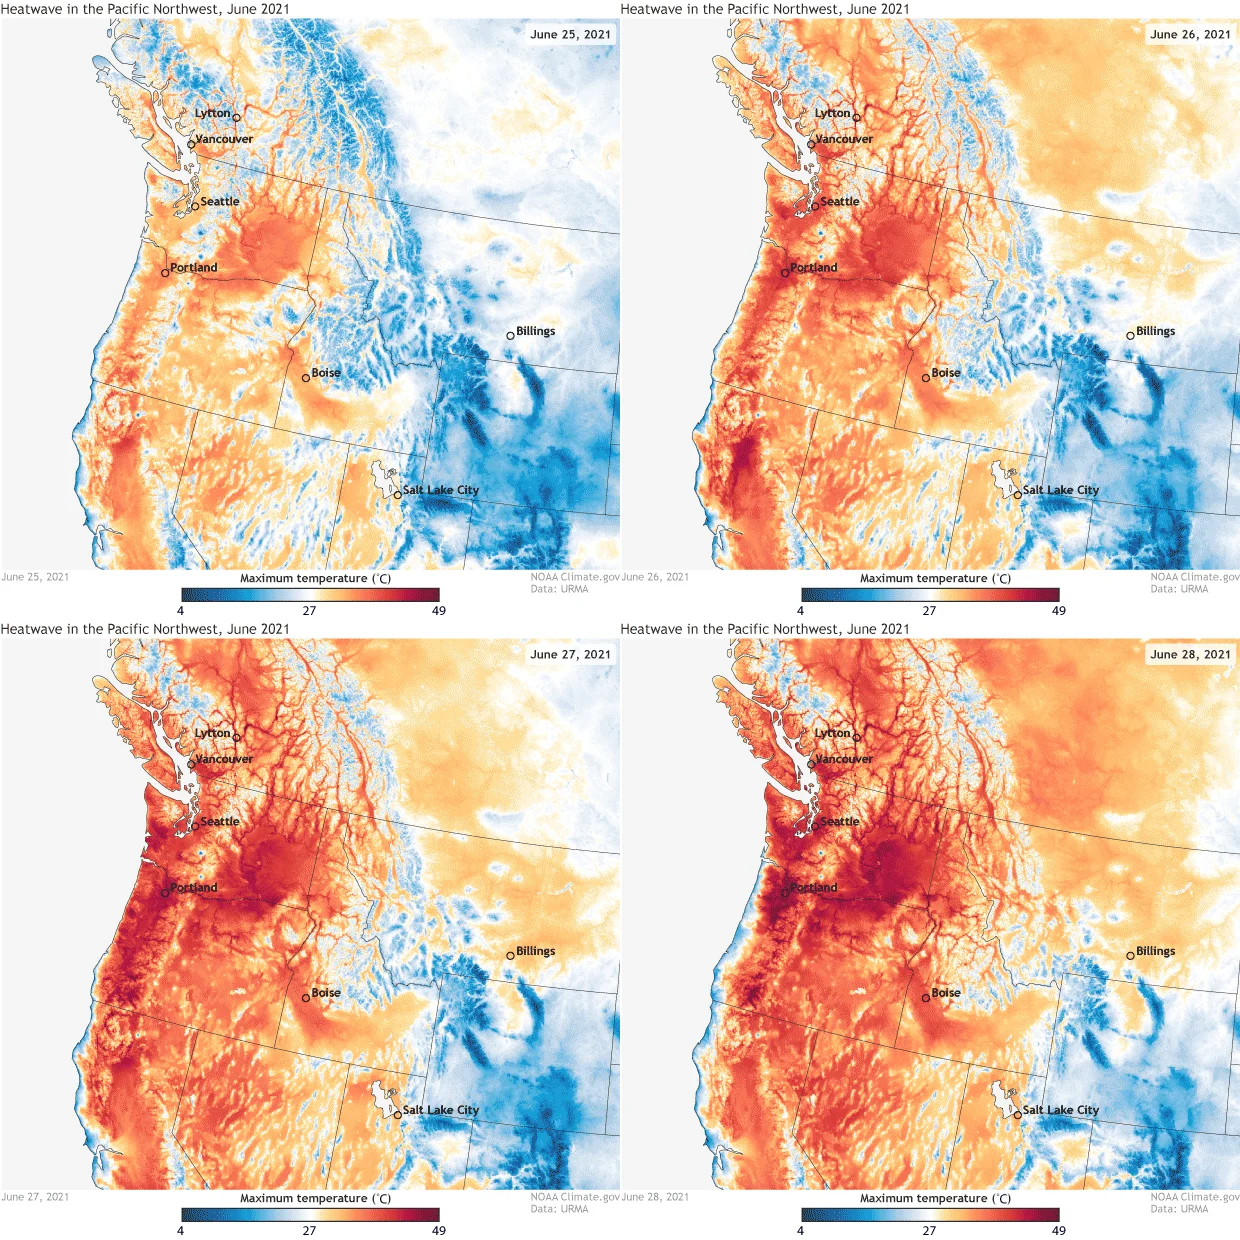 Extreme-Pacific-NW-Heat-Wave-June25-28-2021-NOAAClimate